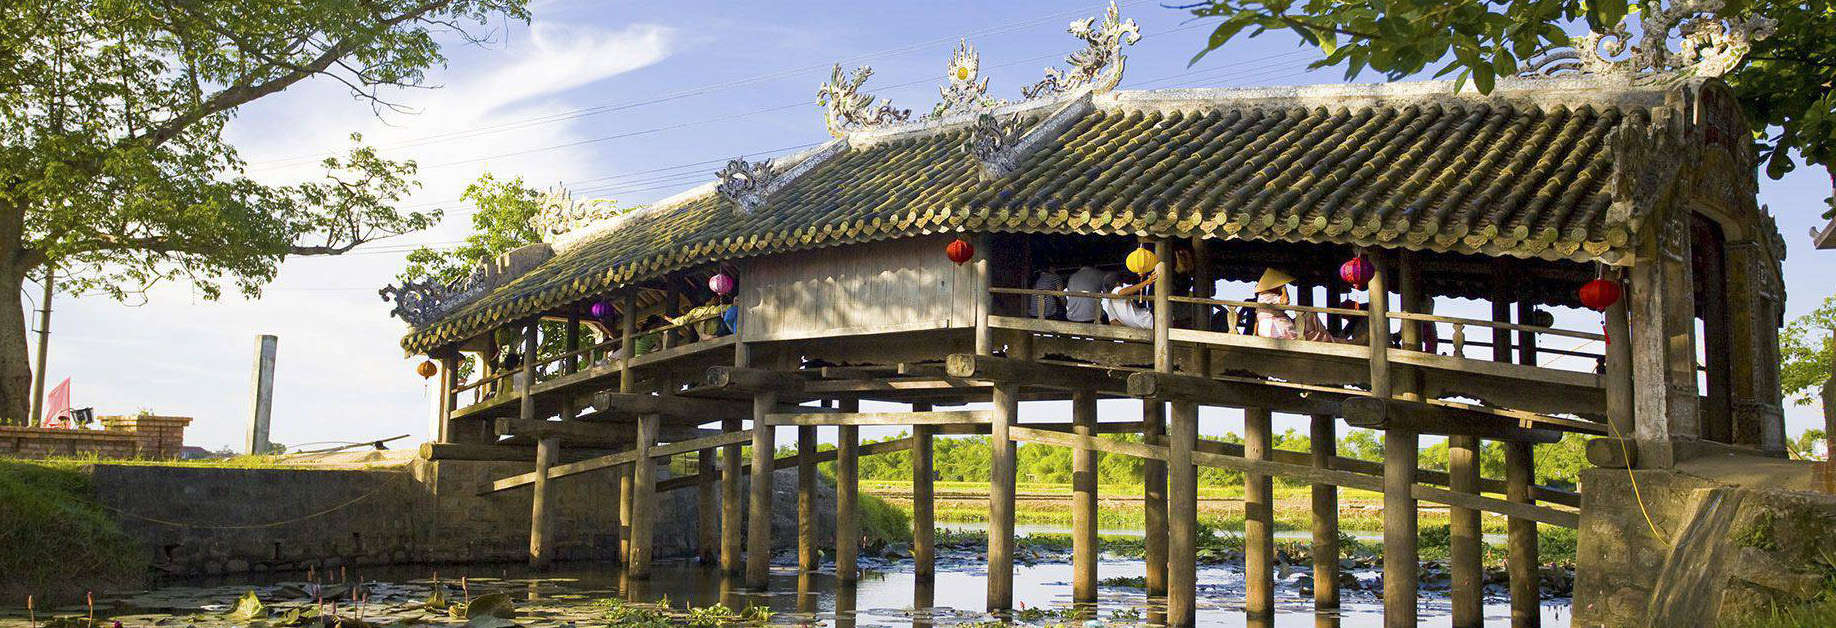 Thanh Toan Tile-Roofed Bridge in Hue: The Most Ancient in Vietnam